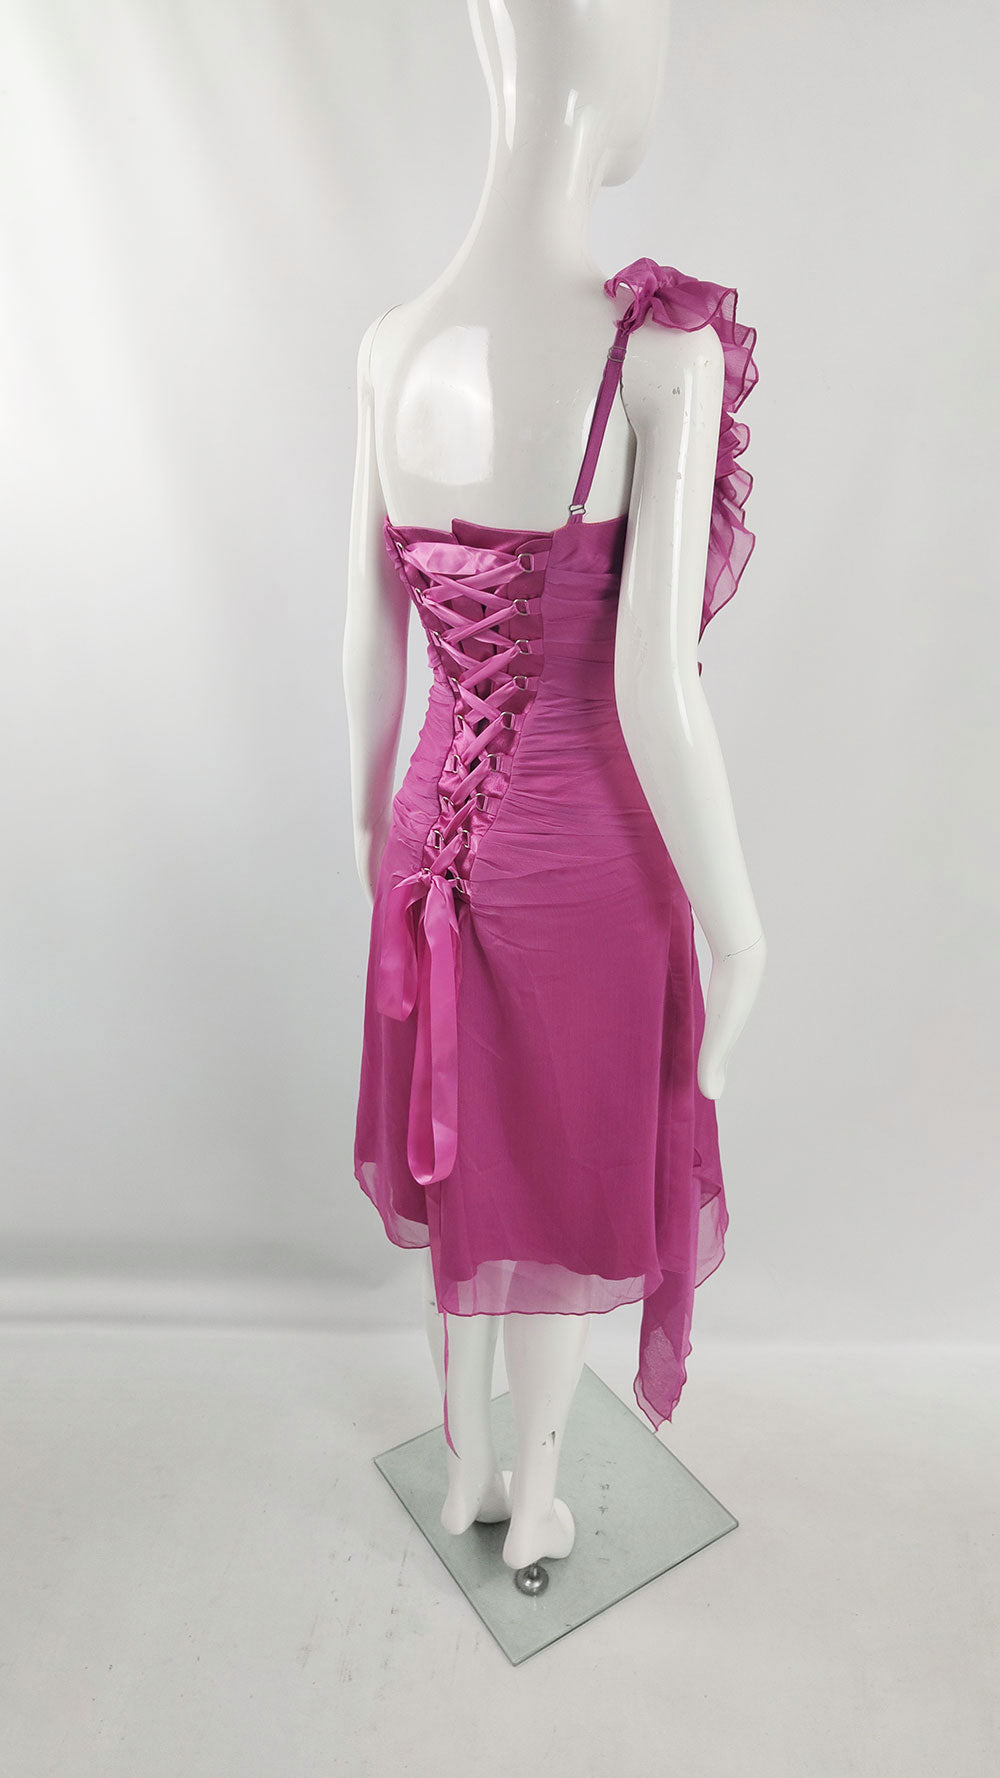 A frilly y2k corset dress from the 2000s by Charas.